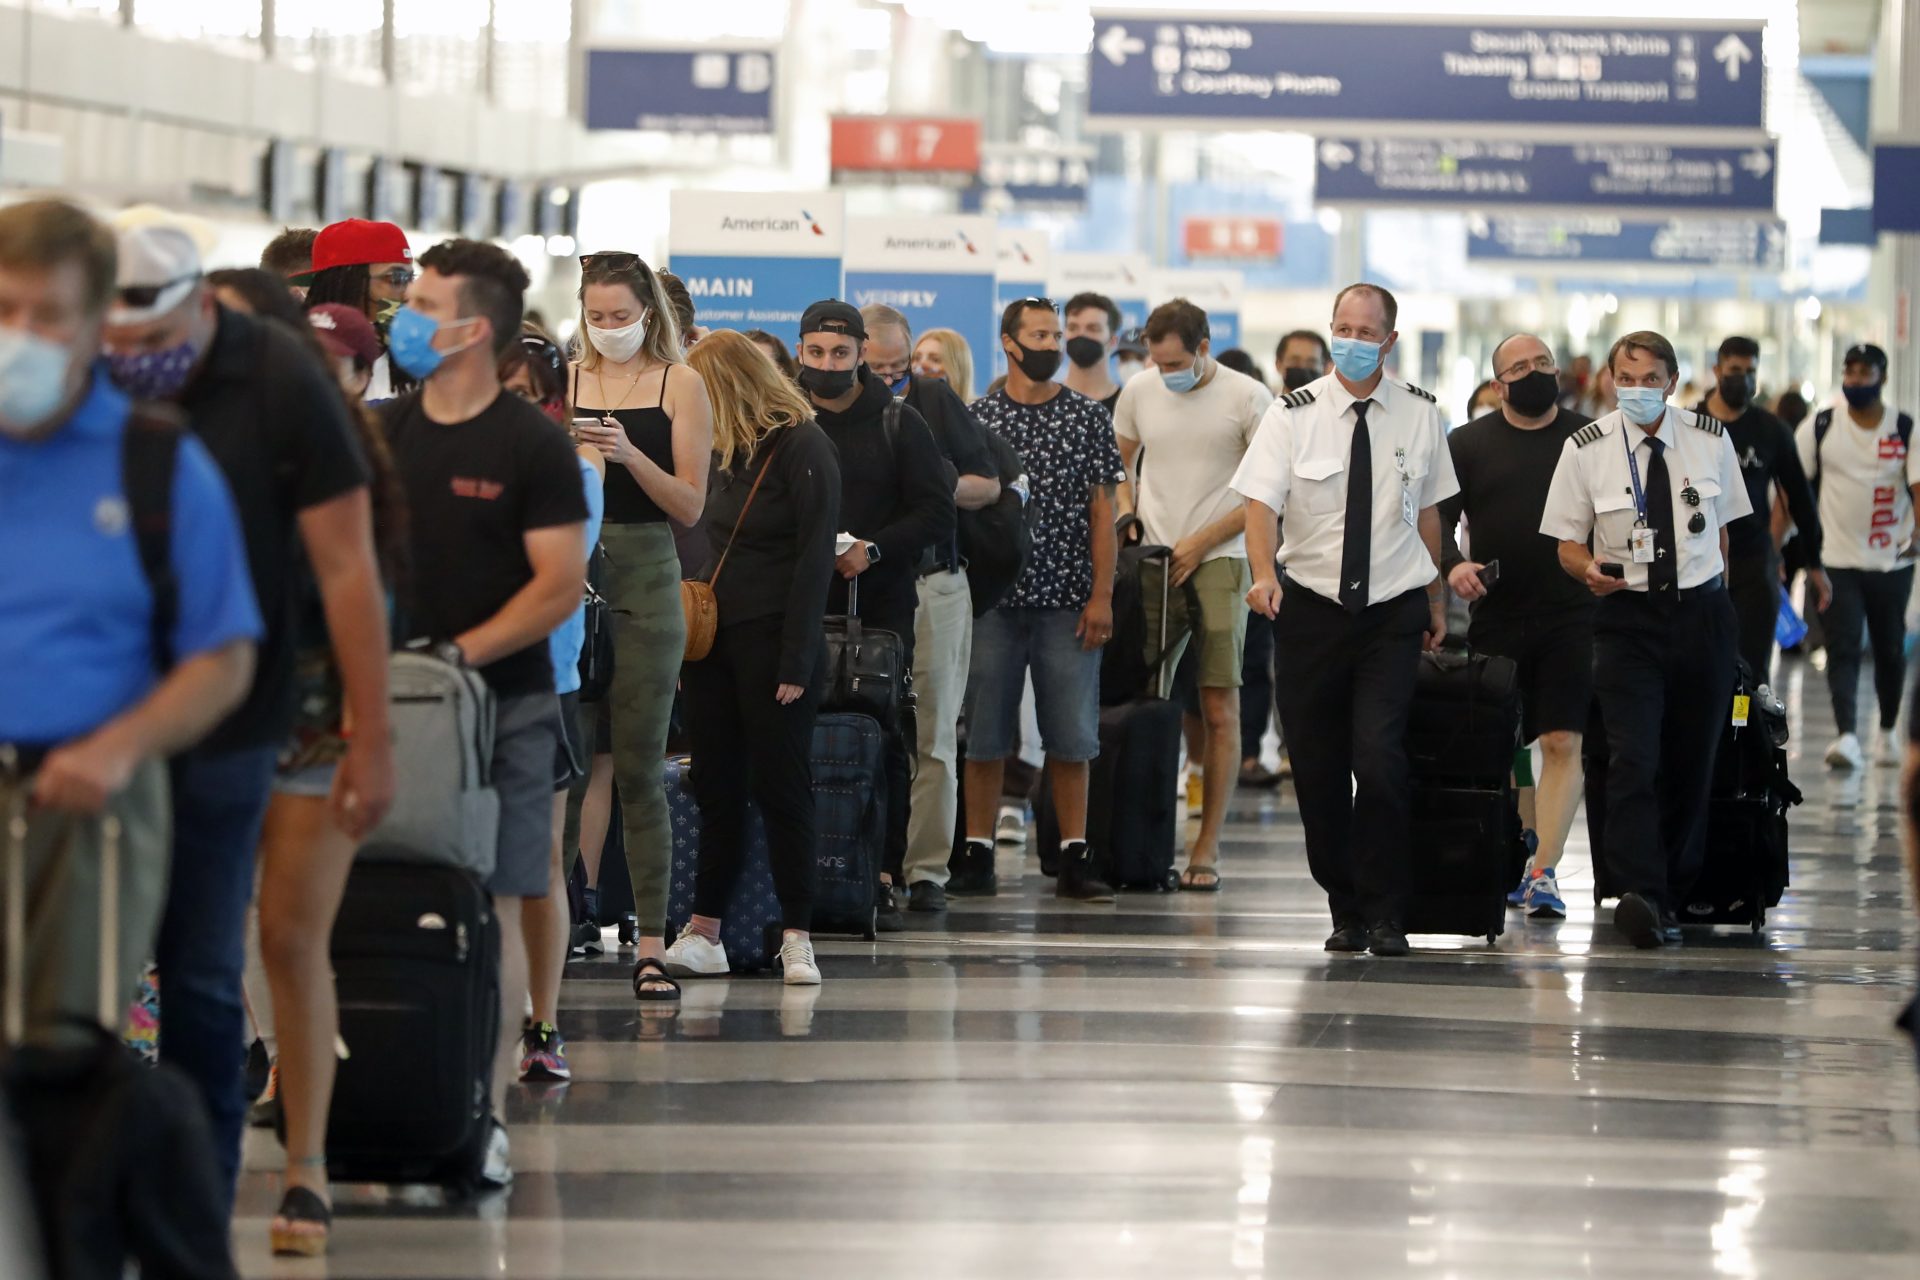 Two airplane pilots pass by a line of passengers while waiting at a security check-in line at O'Hare International Airport in Chicago, ahead of Fourth of July weekend, July 1, 2021.